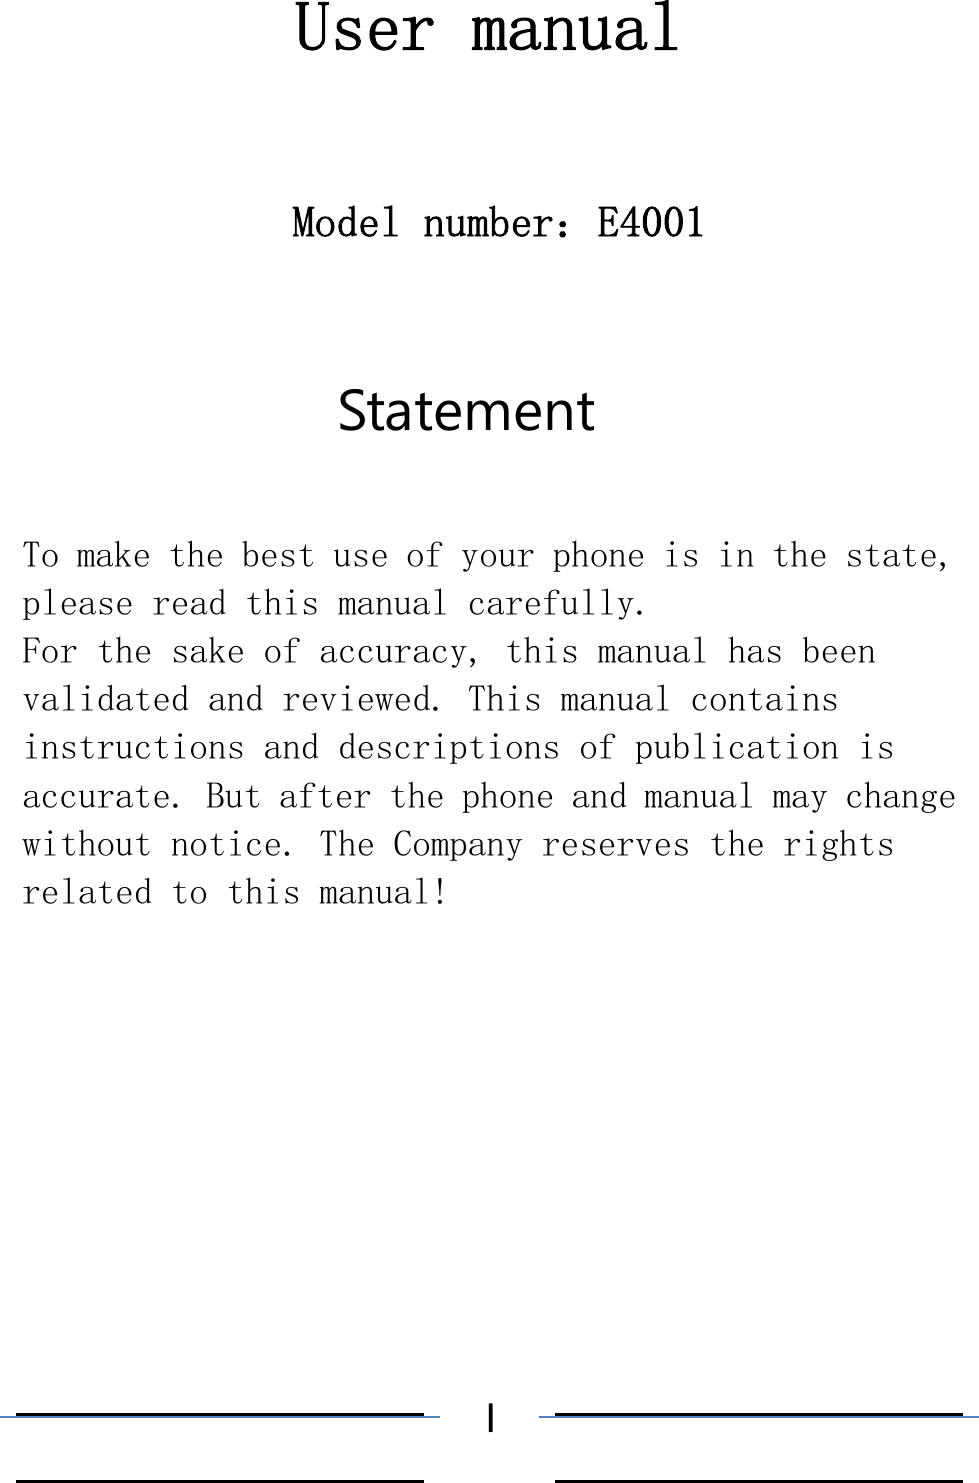  IUser manual Model number：E4001 Statement To make the best use of your phone is in the state, please read this manual carefully. For the sake of accuracy, this manual has been validated and reviewed. This manual contains instructions and descriptions of publication is accurate. But after the phone and manual may change without notice. The Company reserves the rights related to this manual! 